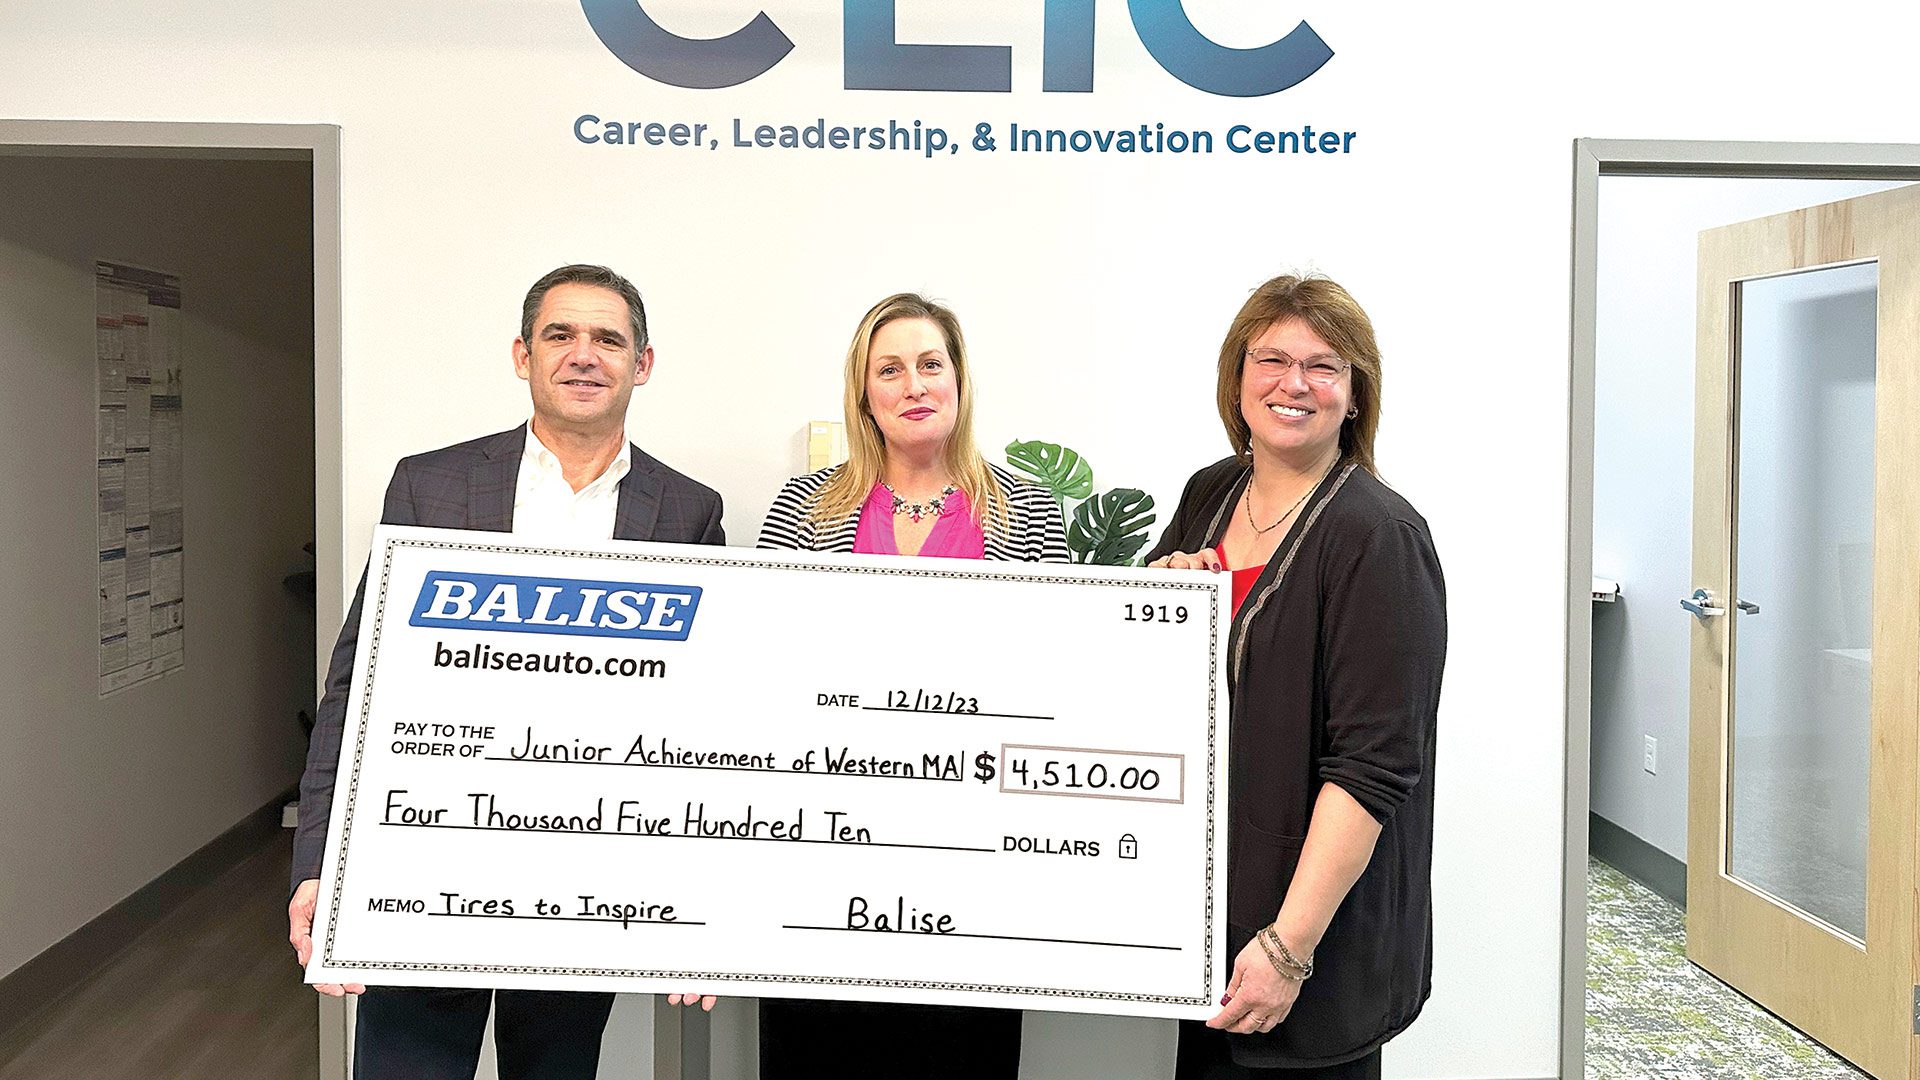 Balise was able to present a donation of $4,510 to the organization to assist in its mission of inspiring and preparing young people to succeed in a global economy